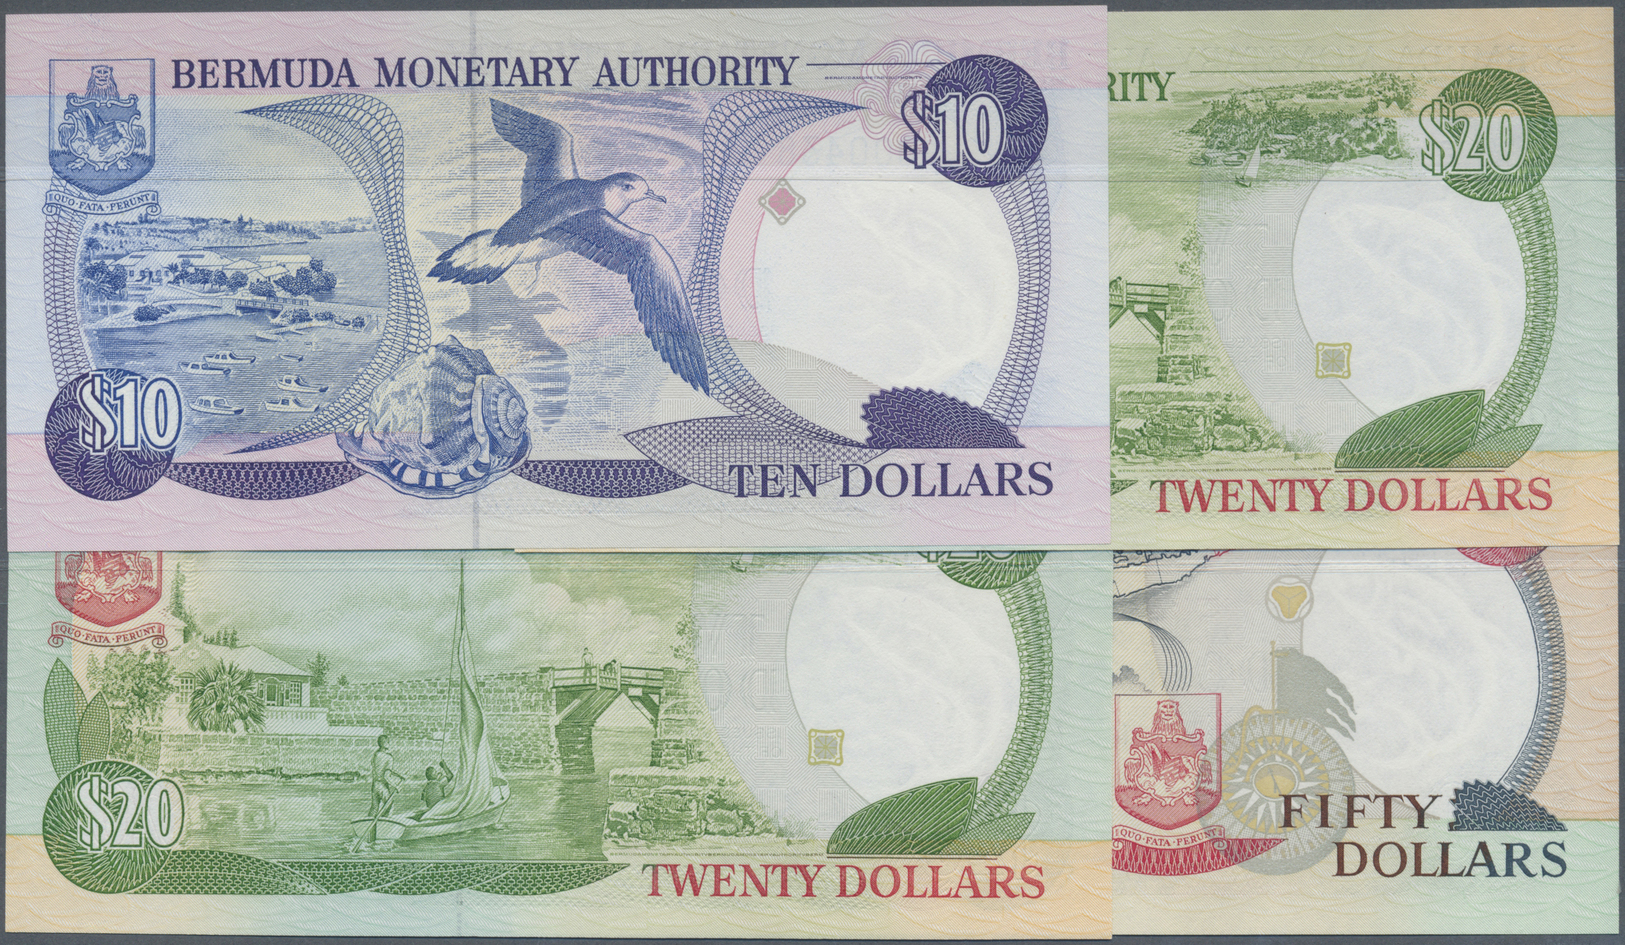 00316 Bermuda: Set Of 4 Notes Containing 10 Dollars 1989, 2x 20 Dollars 1989 With Low Serial Numbers #000116 And 000113, - Bermudas